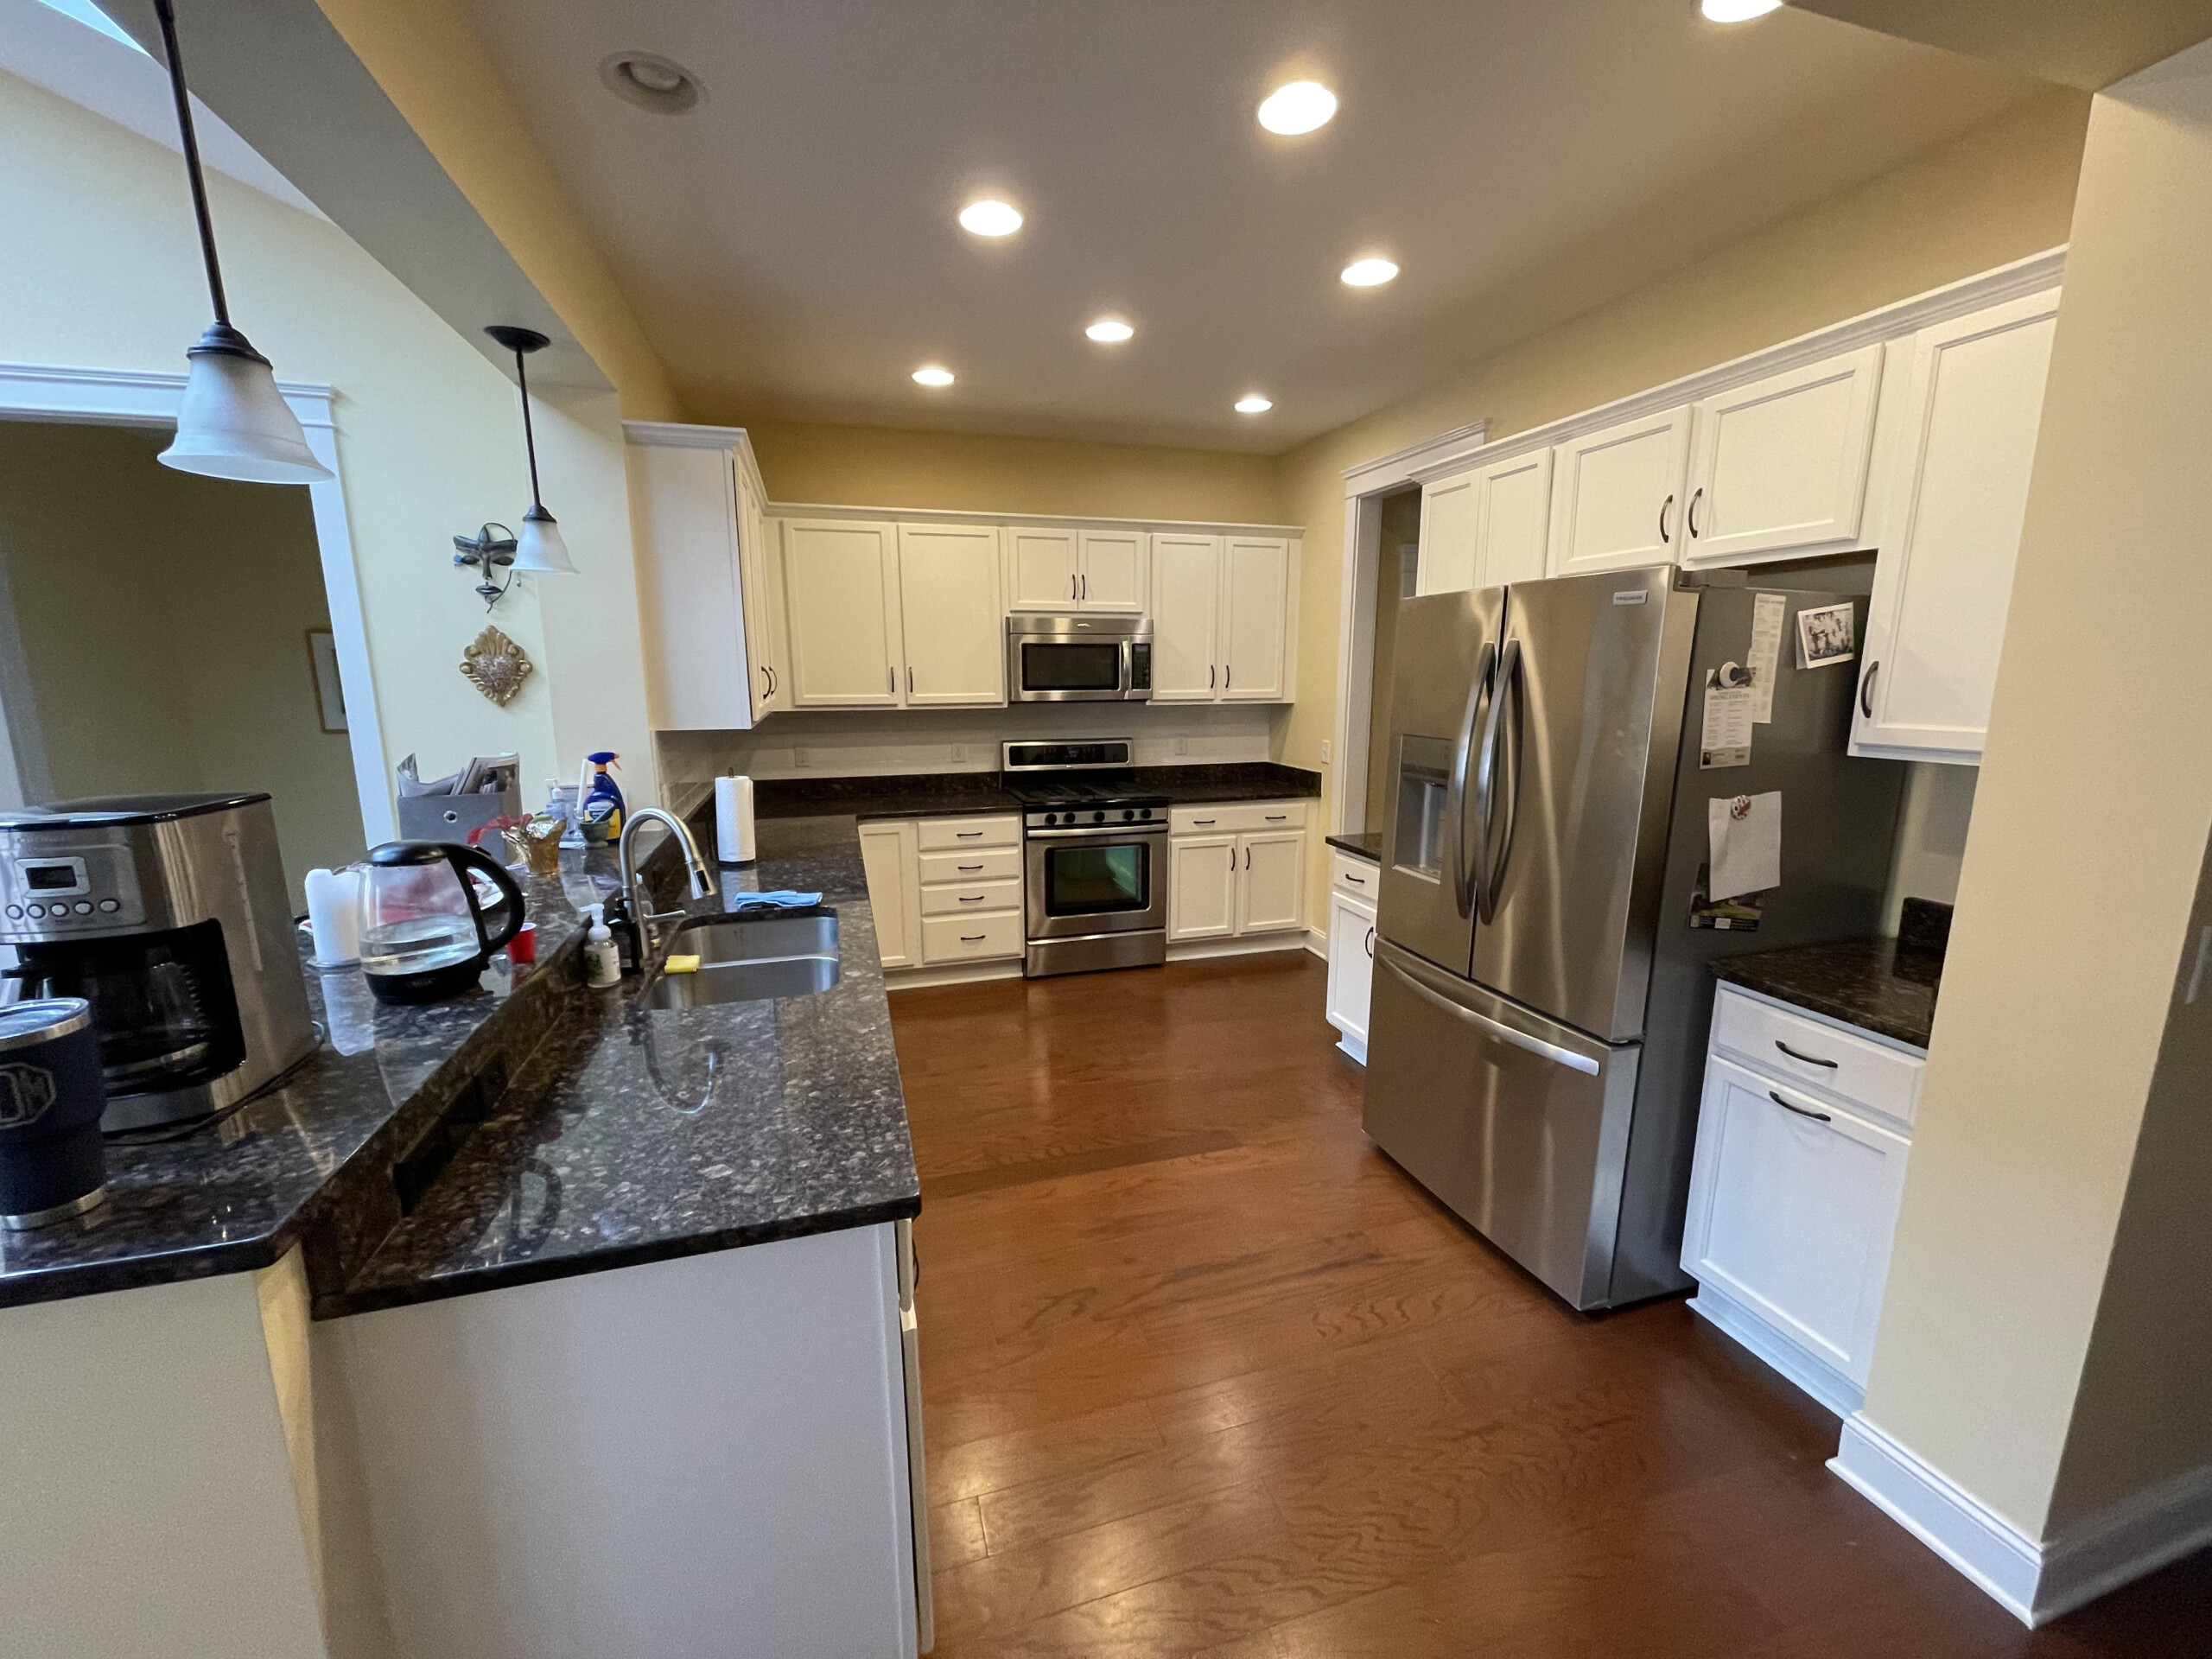 refinished kitchen cabinets that are white